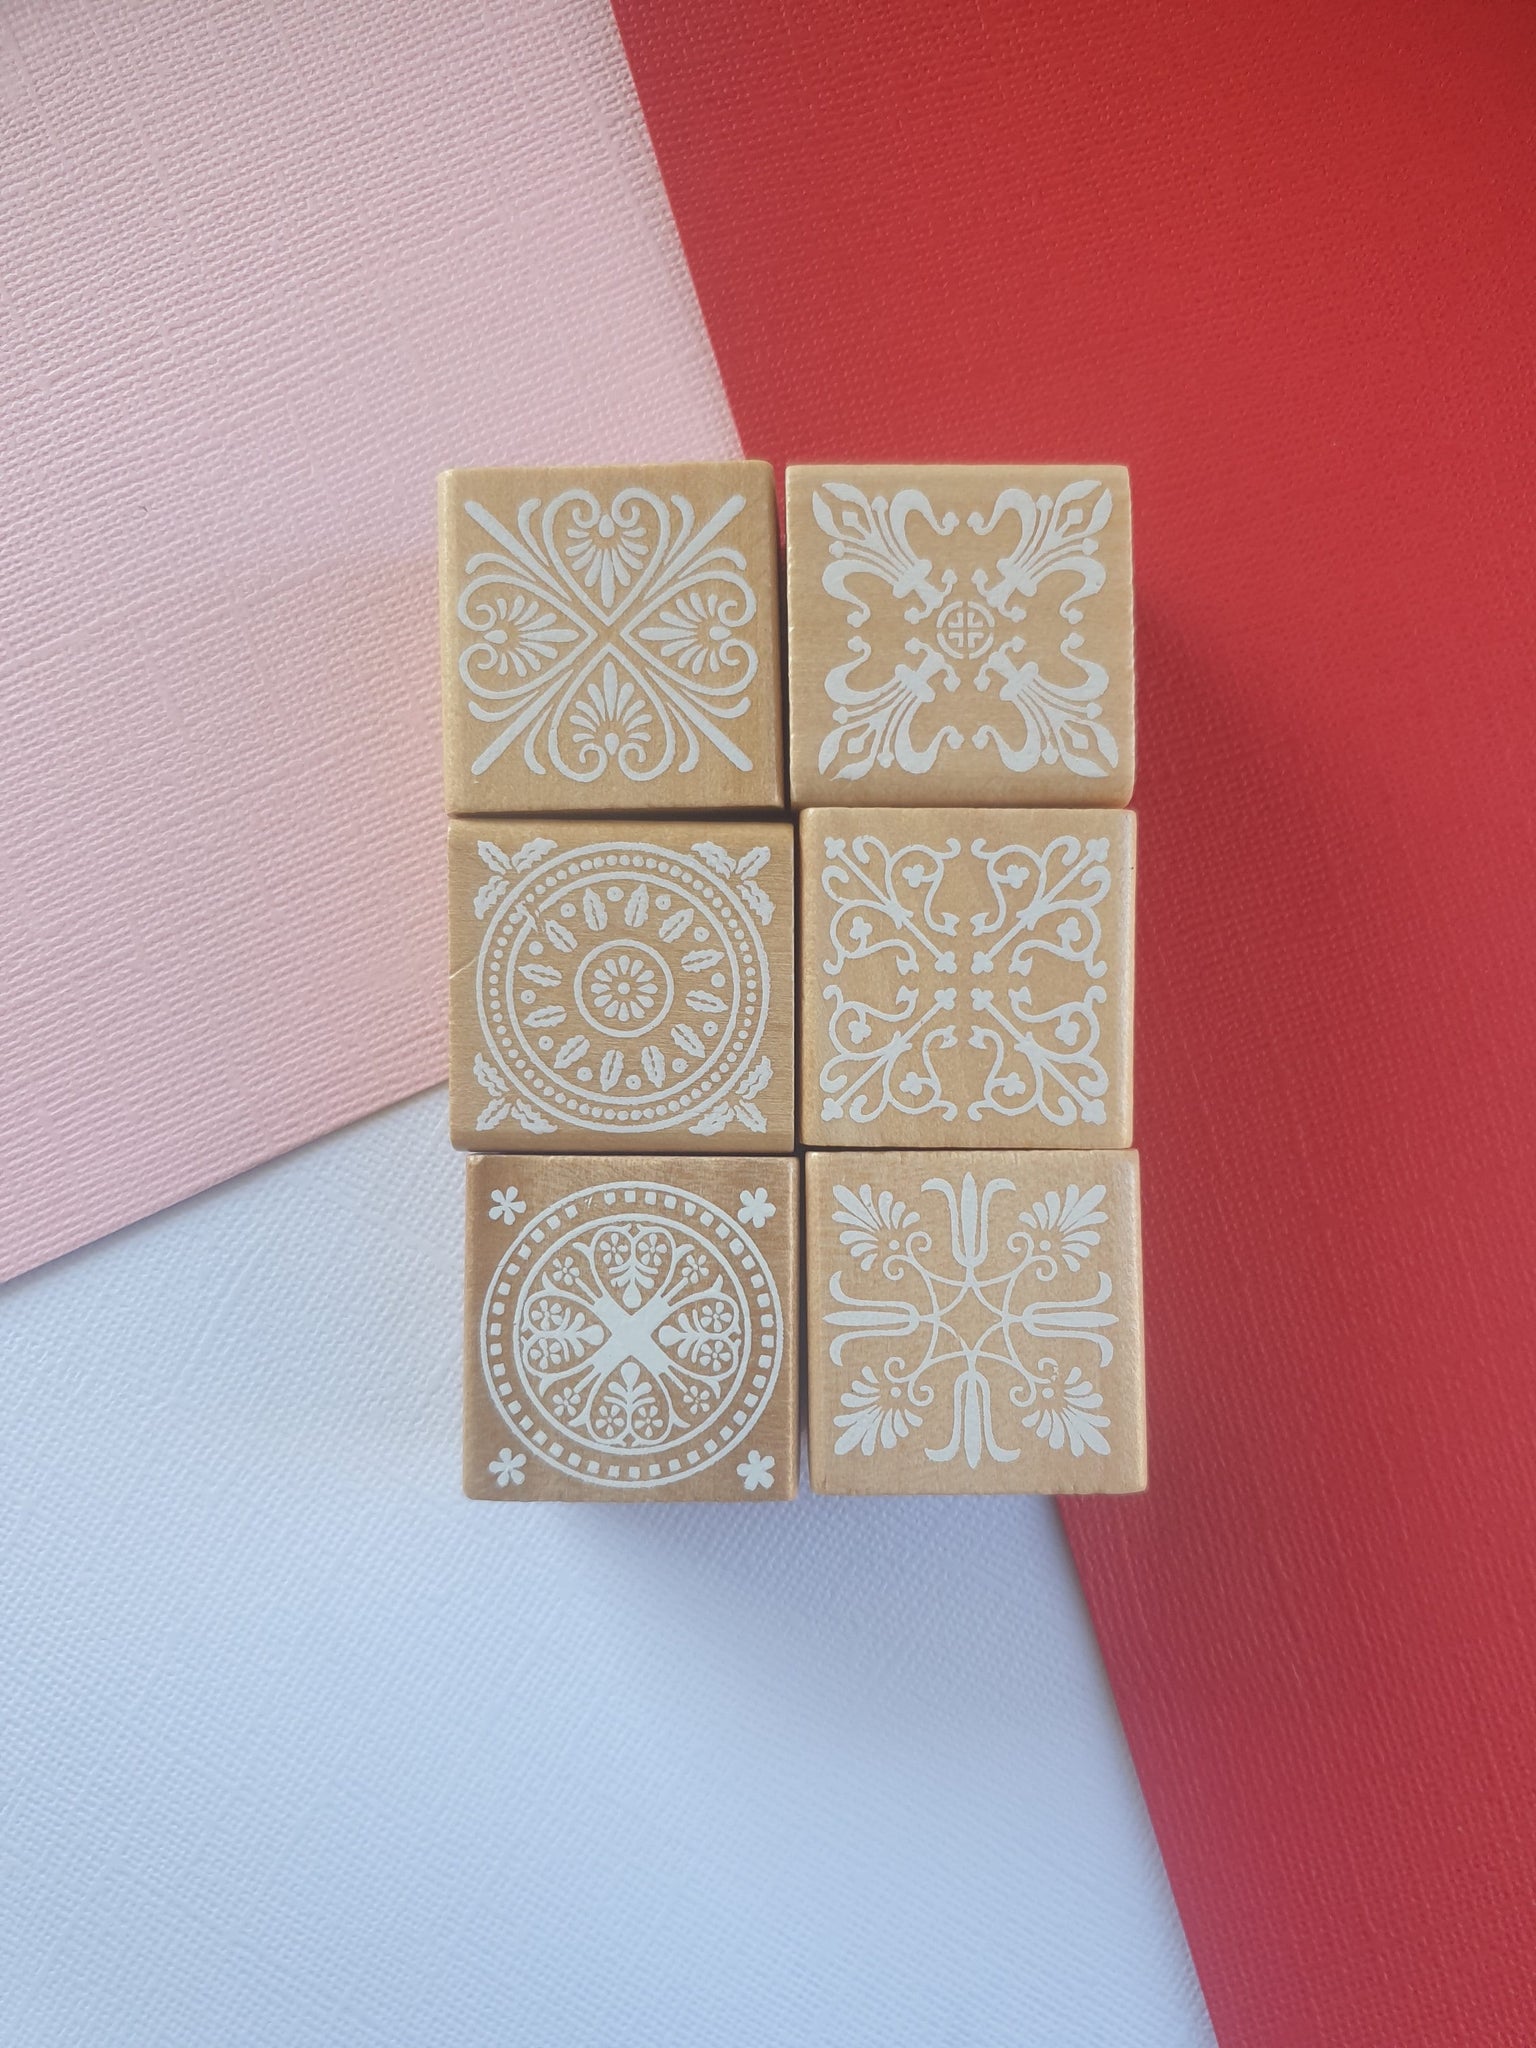 6pcs 3cm Square Emboss Stamp, Mandala stamp, Lace Texture for craft, Sculpture stamp for pottery, Polymer Clay tools, Wooden stamp Australia